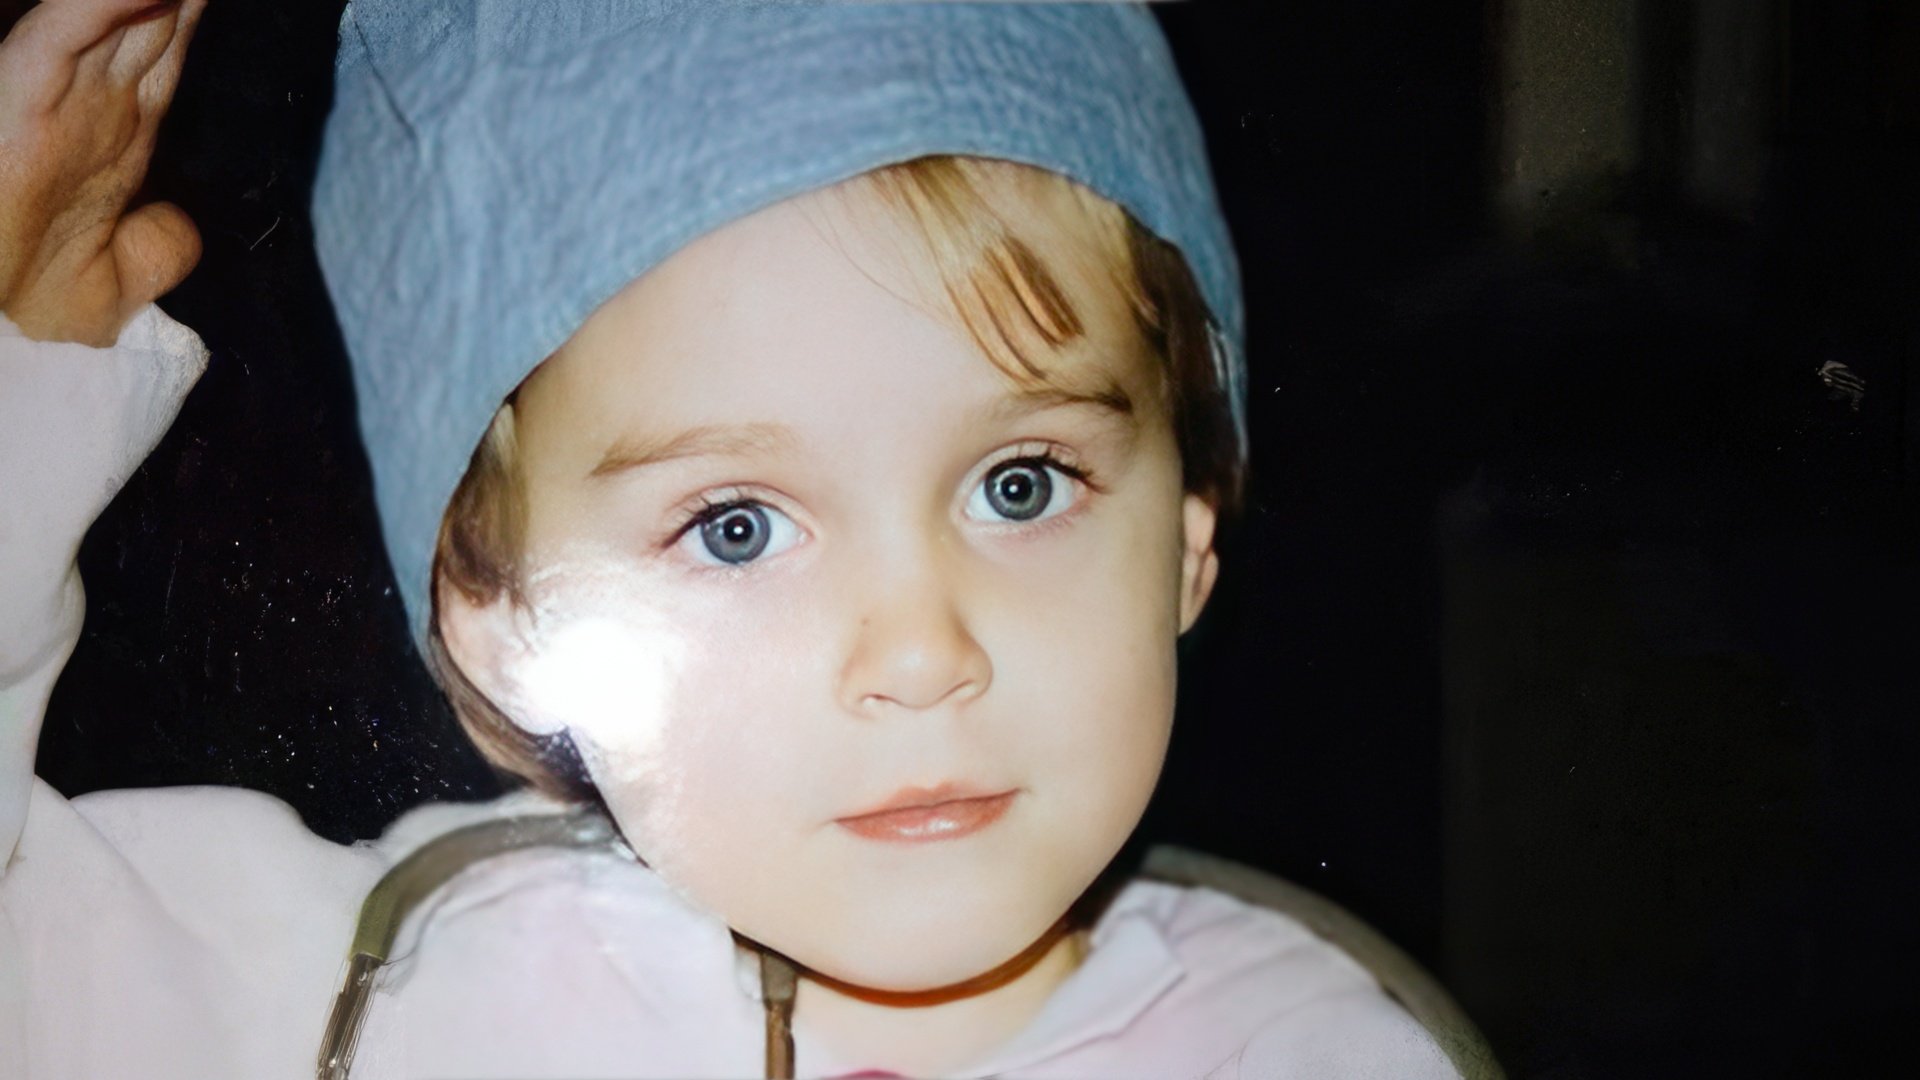 Taylor Schilling in her childhood